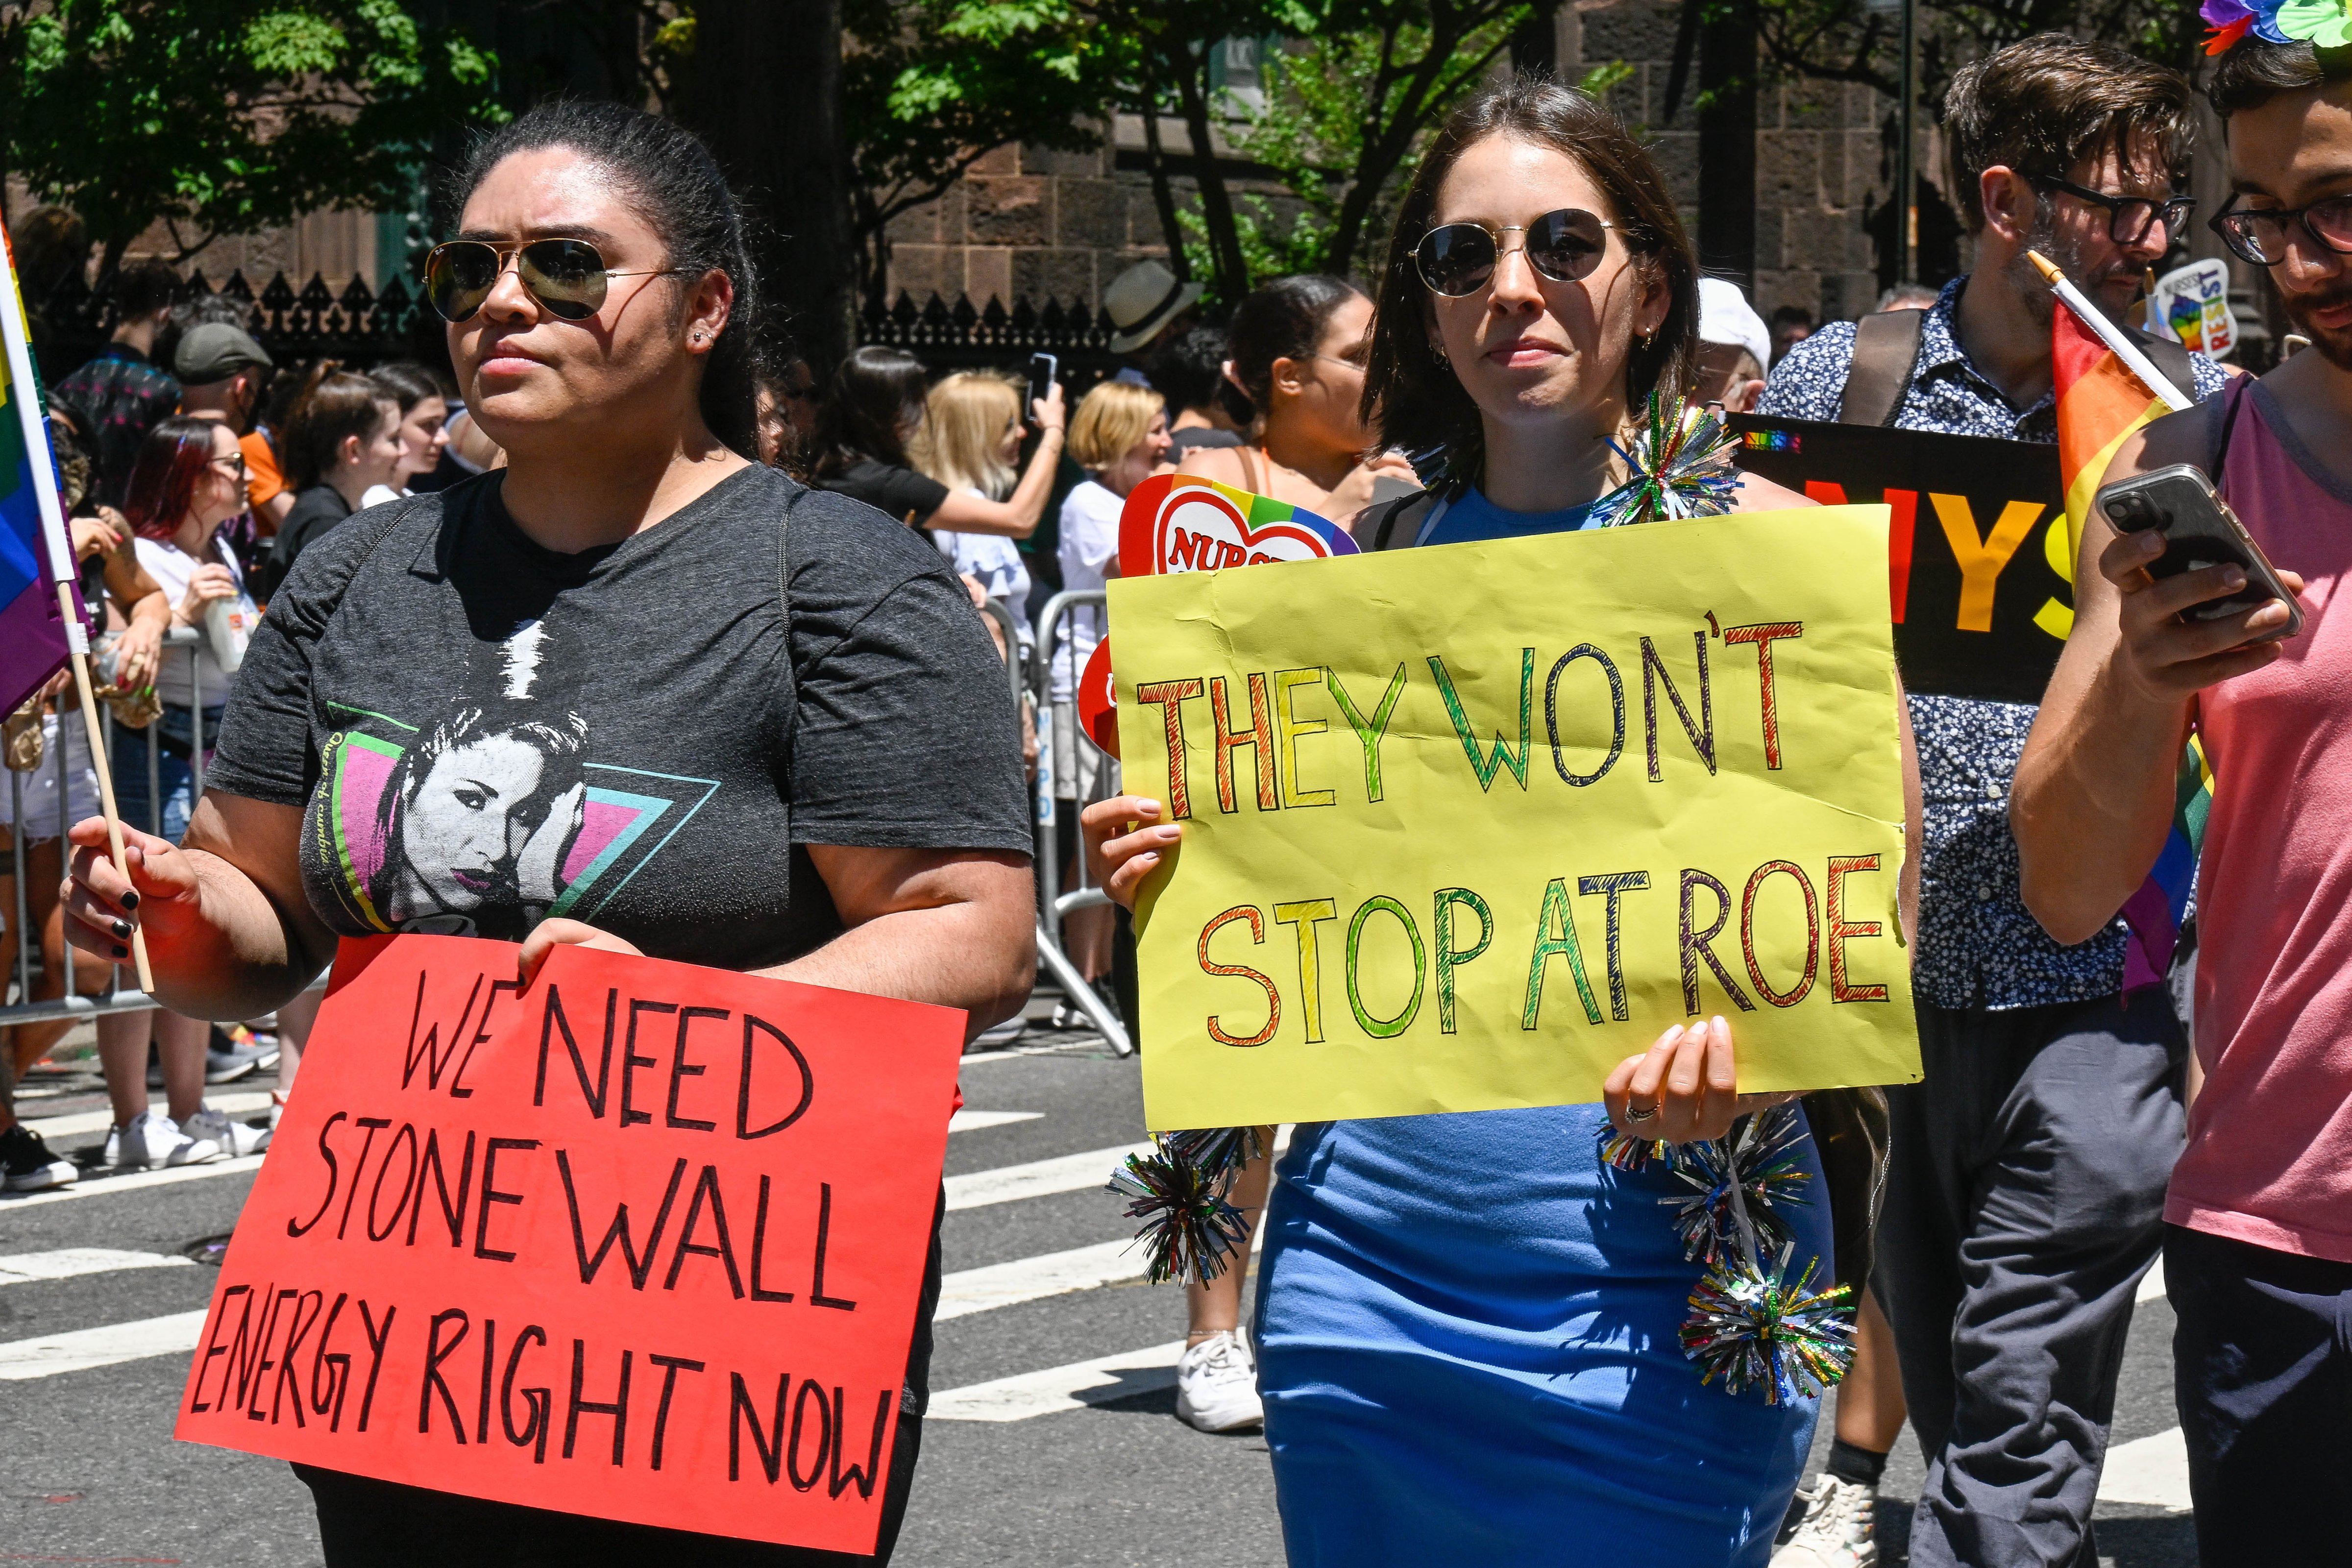 Marchers protest against the recent overturn of Roe v. Wade during the Pride Parade on June 26, 2022 in New York City. (Getty Images/Astrida Valigorsky)